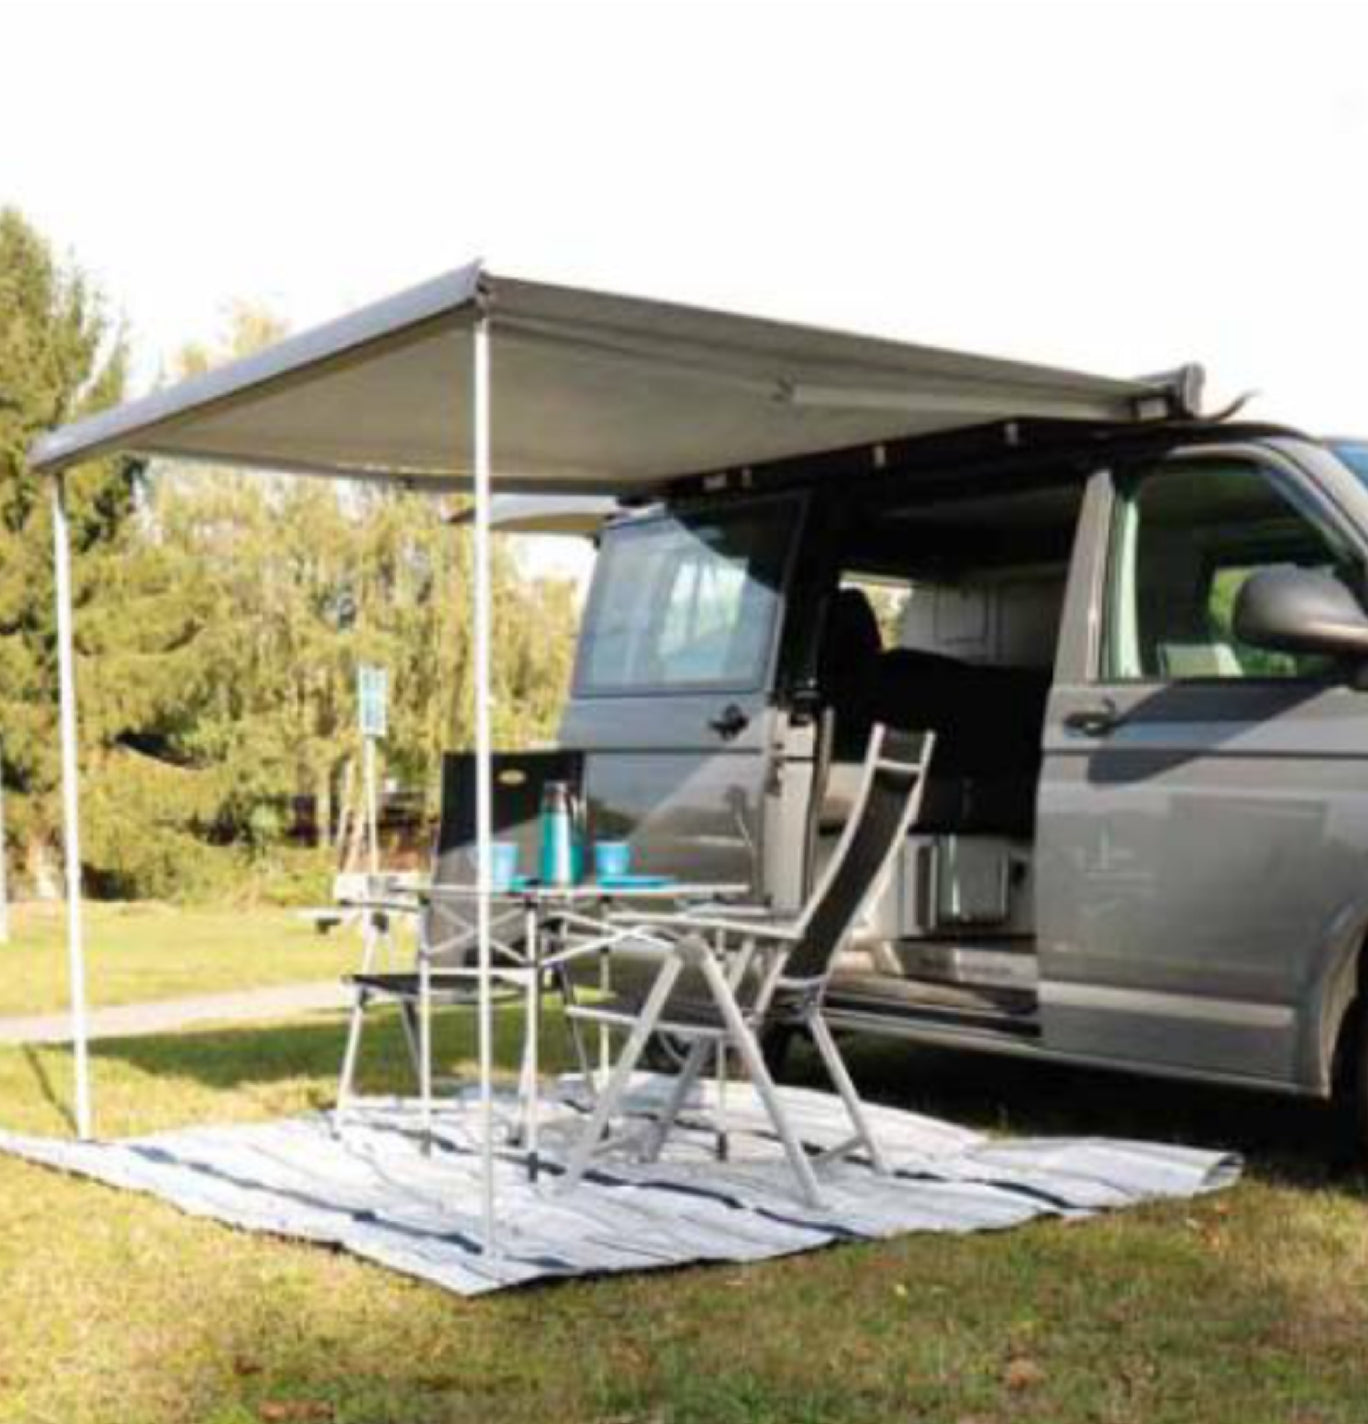 Thule Omnistor Attached to a VW & camping furniture pitched